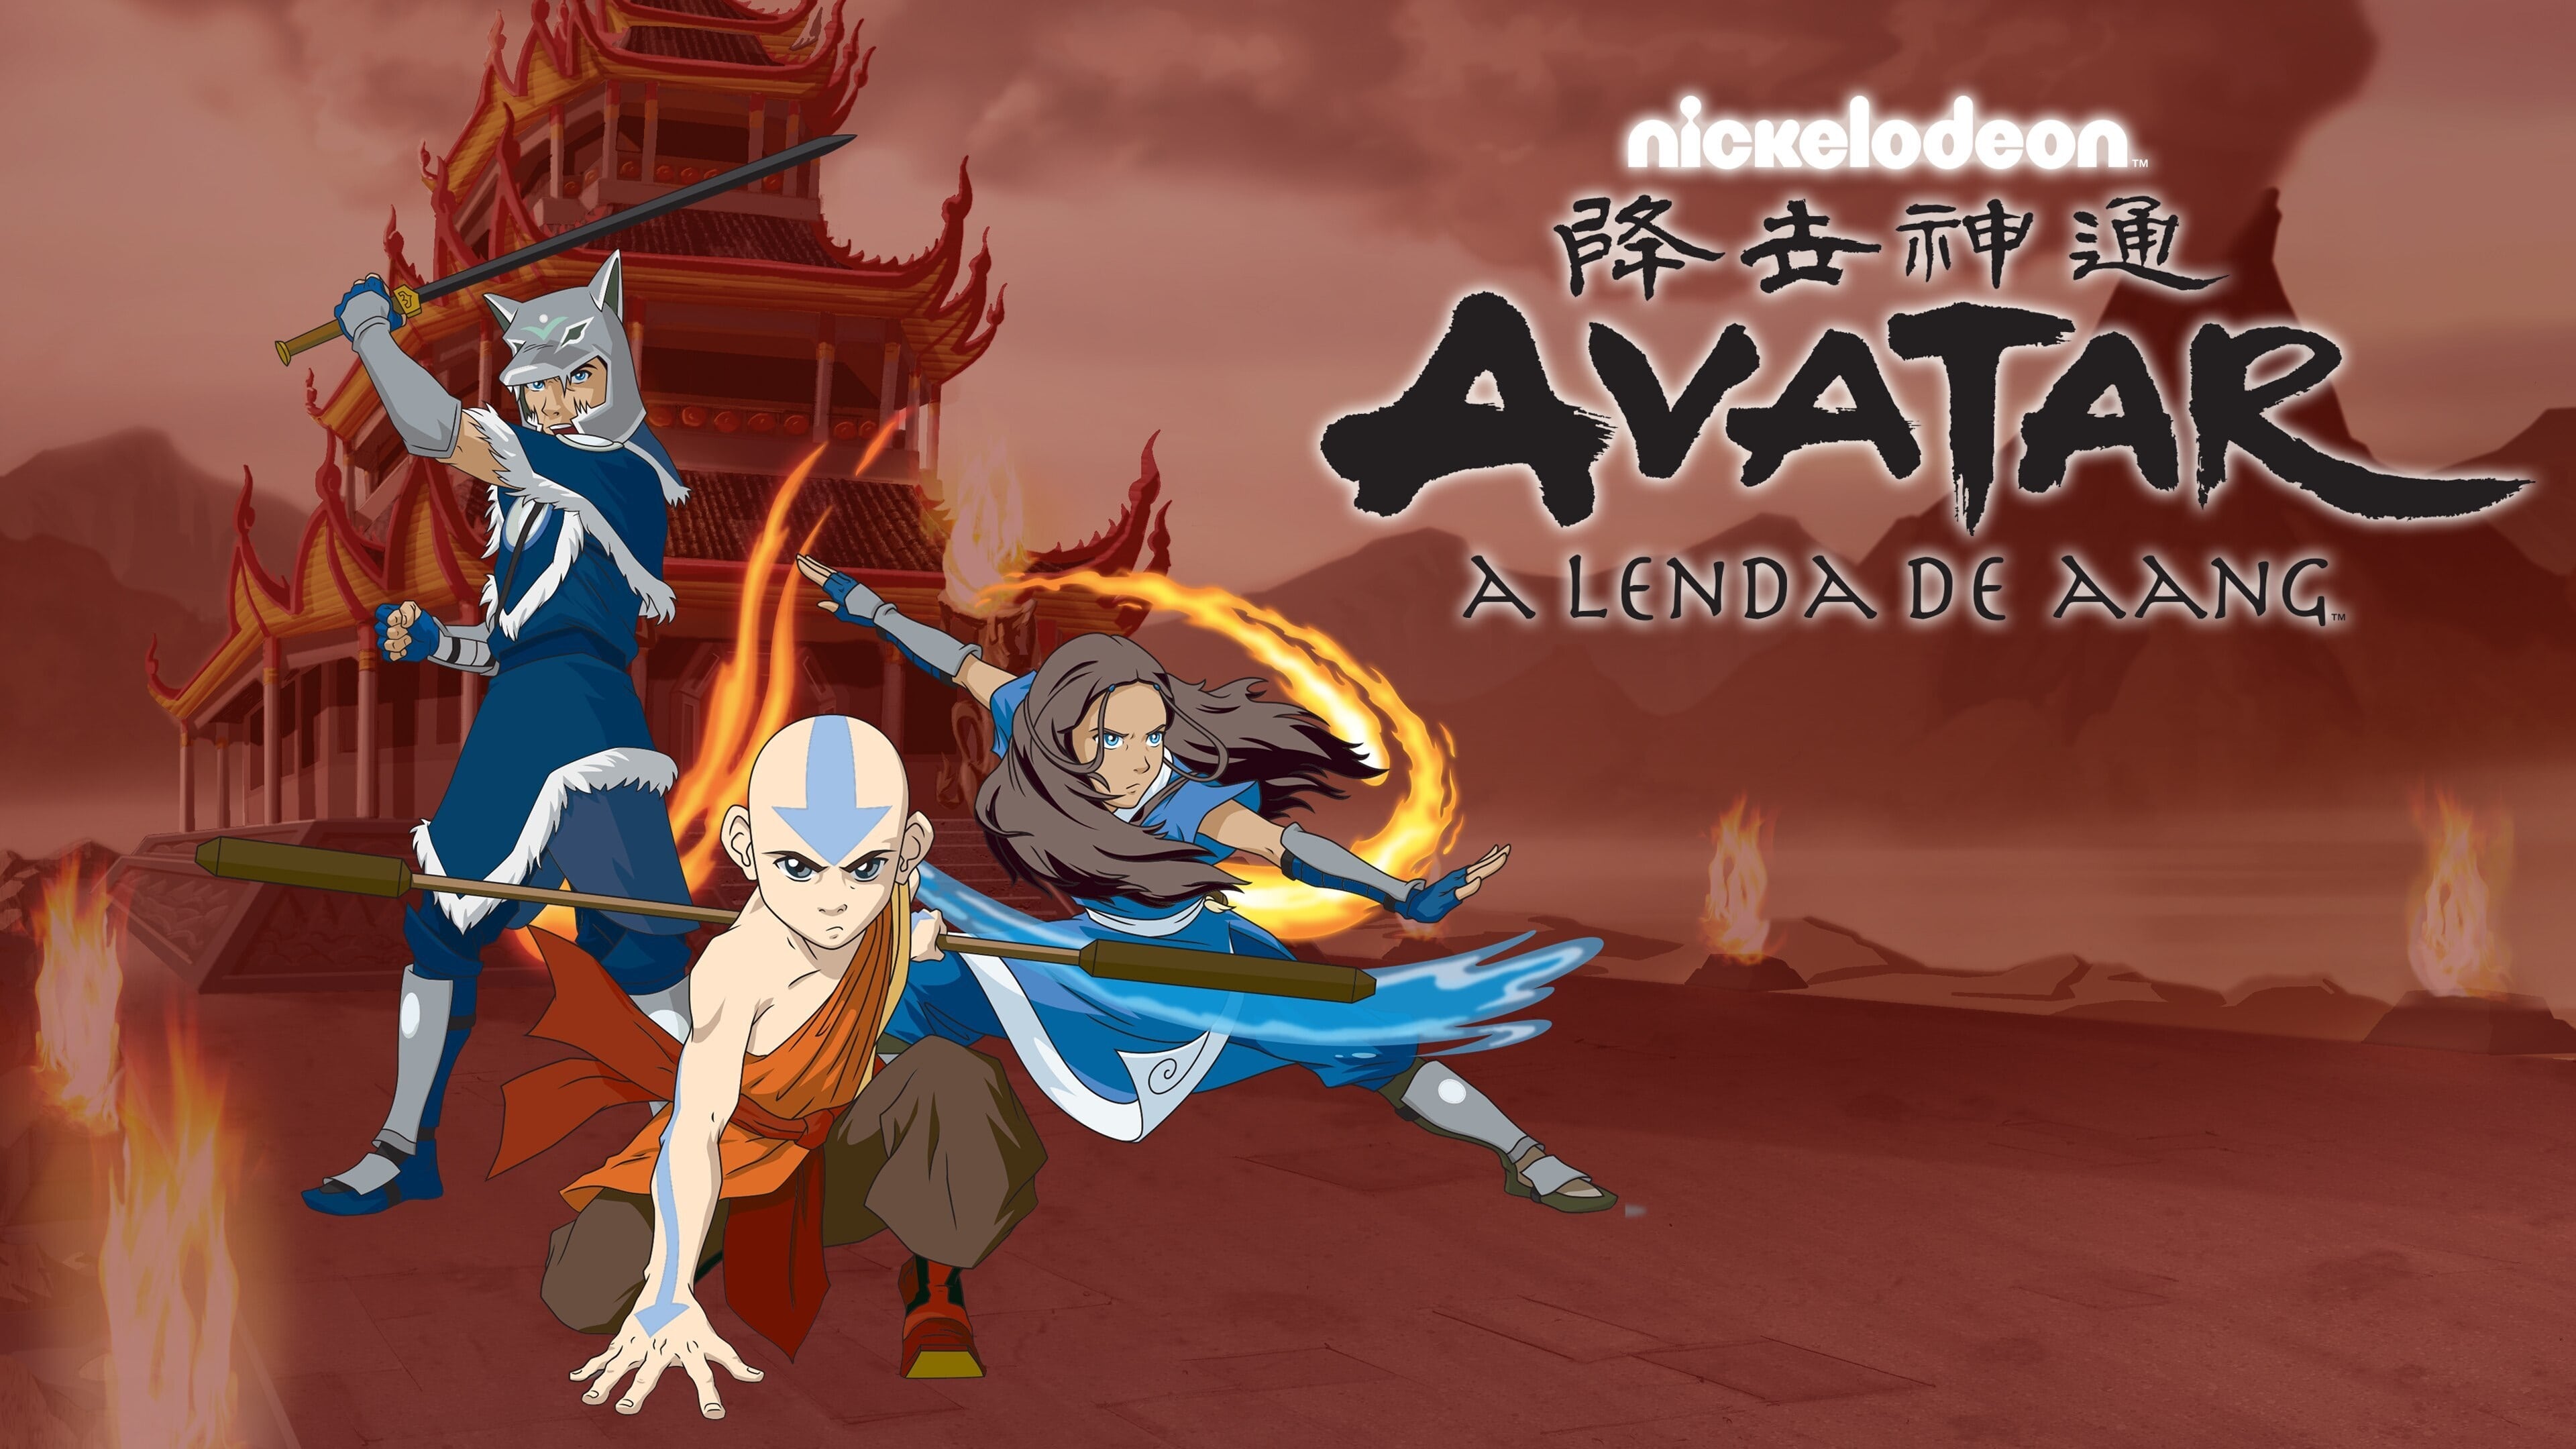 A captivating HD desktop wallpaper featuring characters from Anime series, Avatar: The Last Airbender.